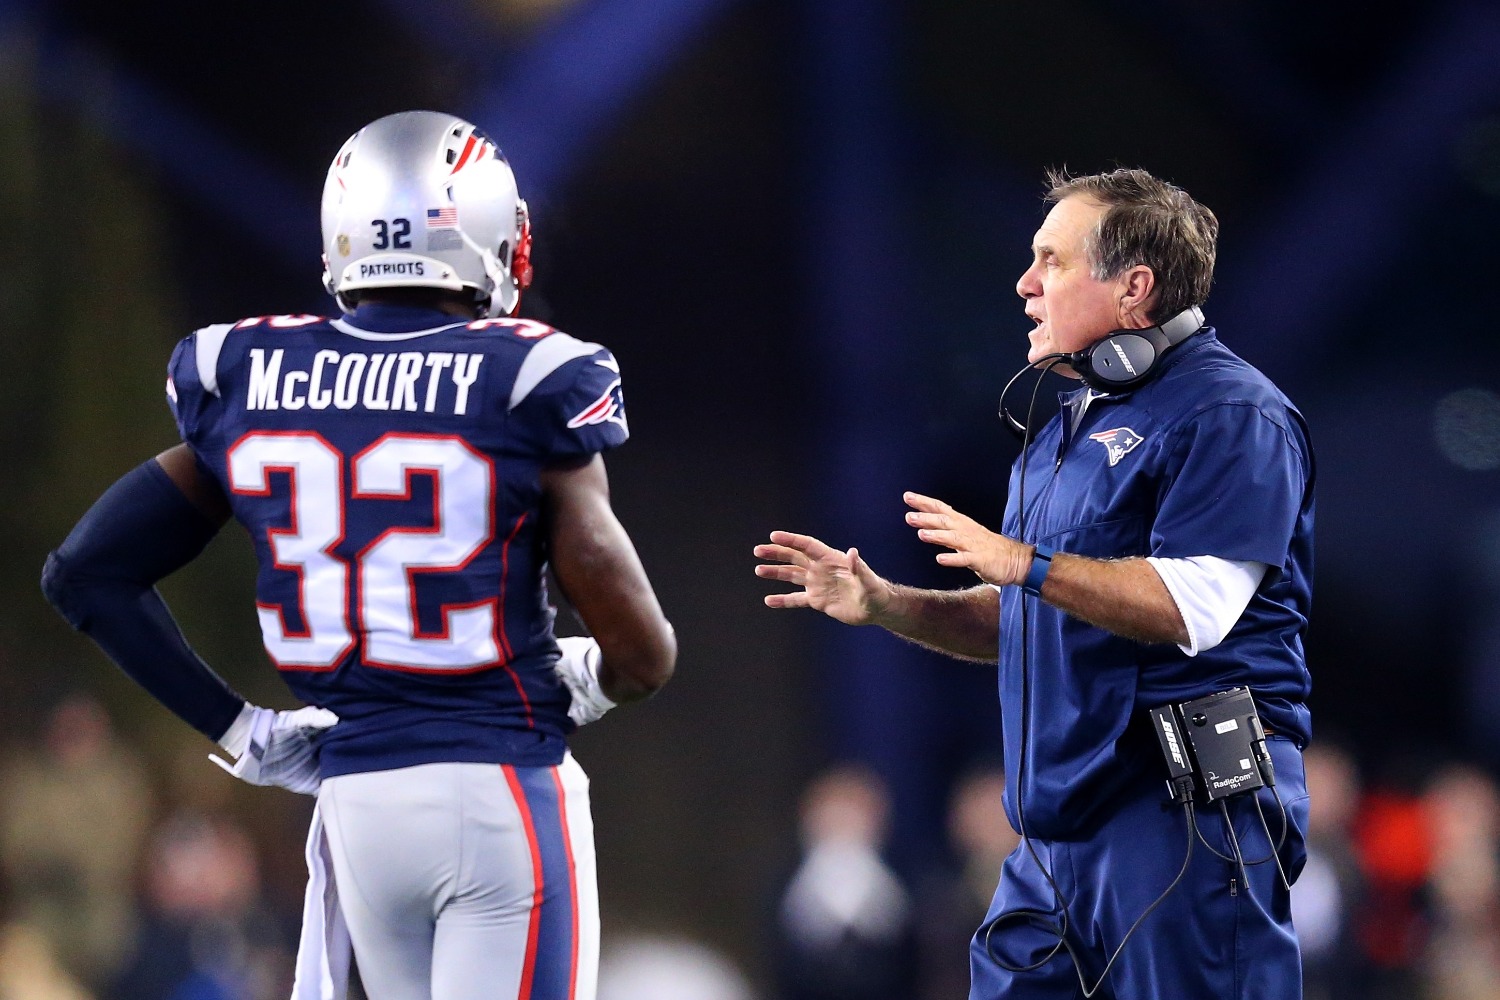 Devin McCourty just proved why Bill Belichick has paid him $60 million during his Patriots career.